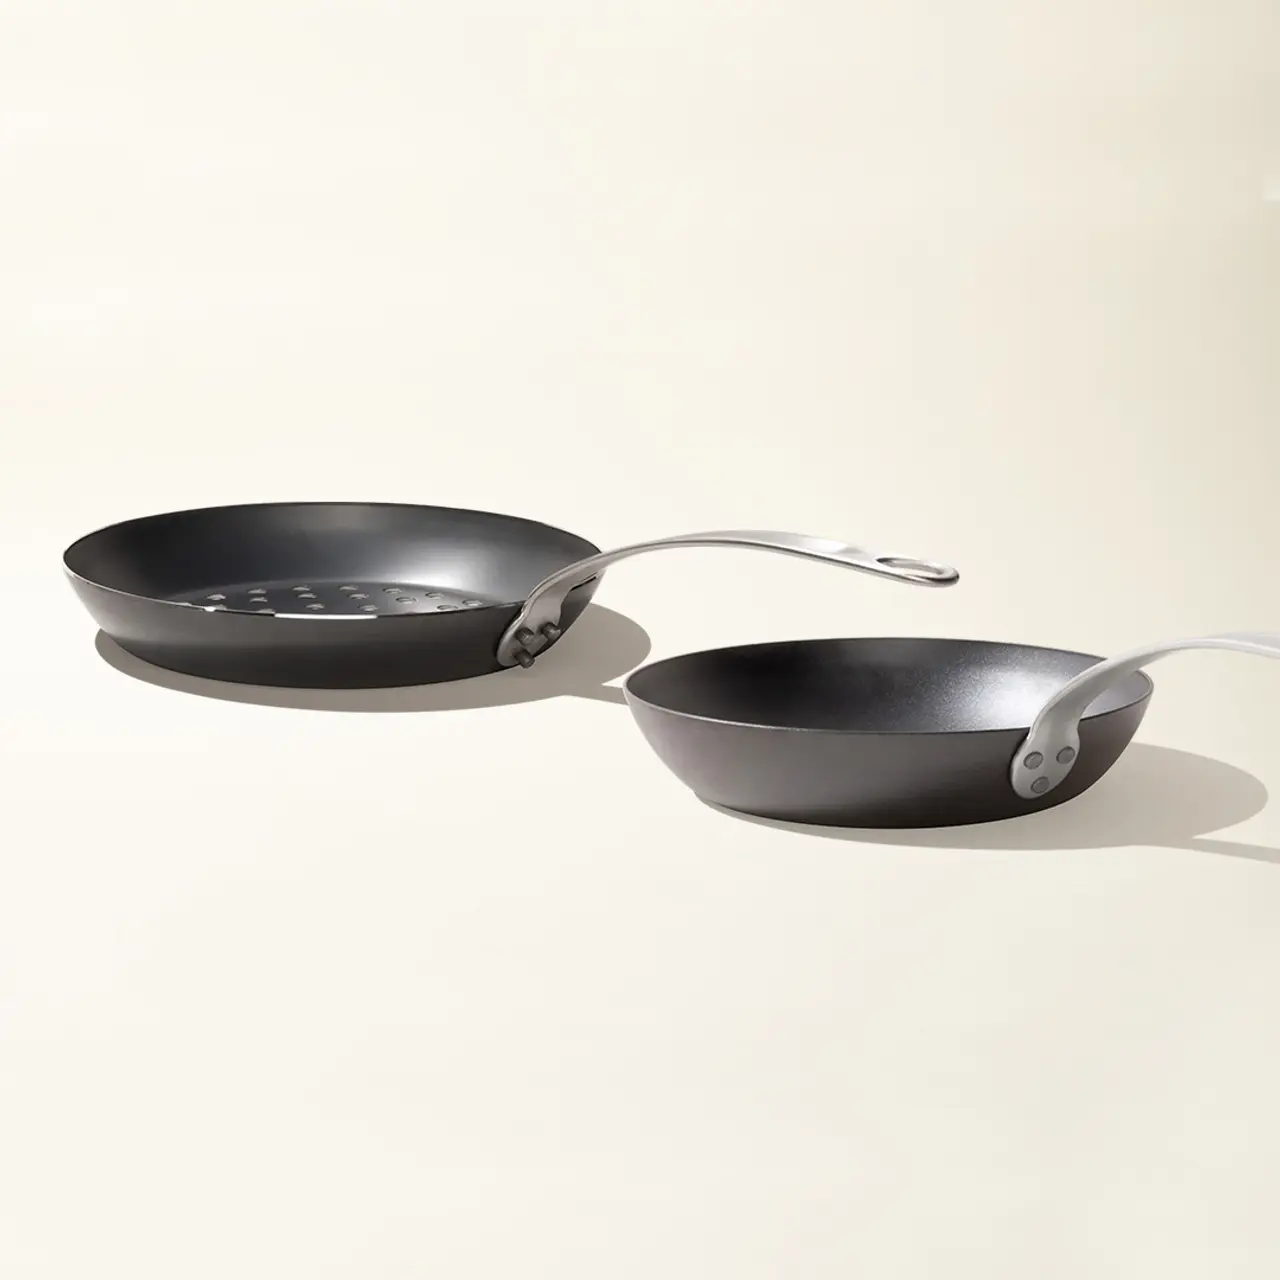 Two black non-stick frying pans with silver handles are positioned side by side on a light background.